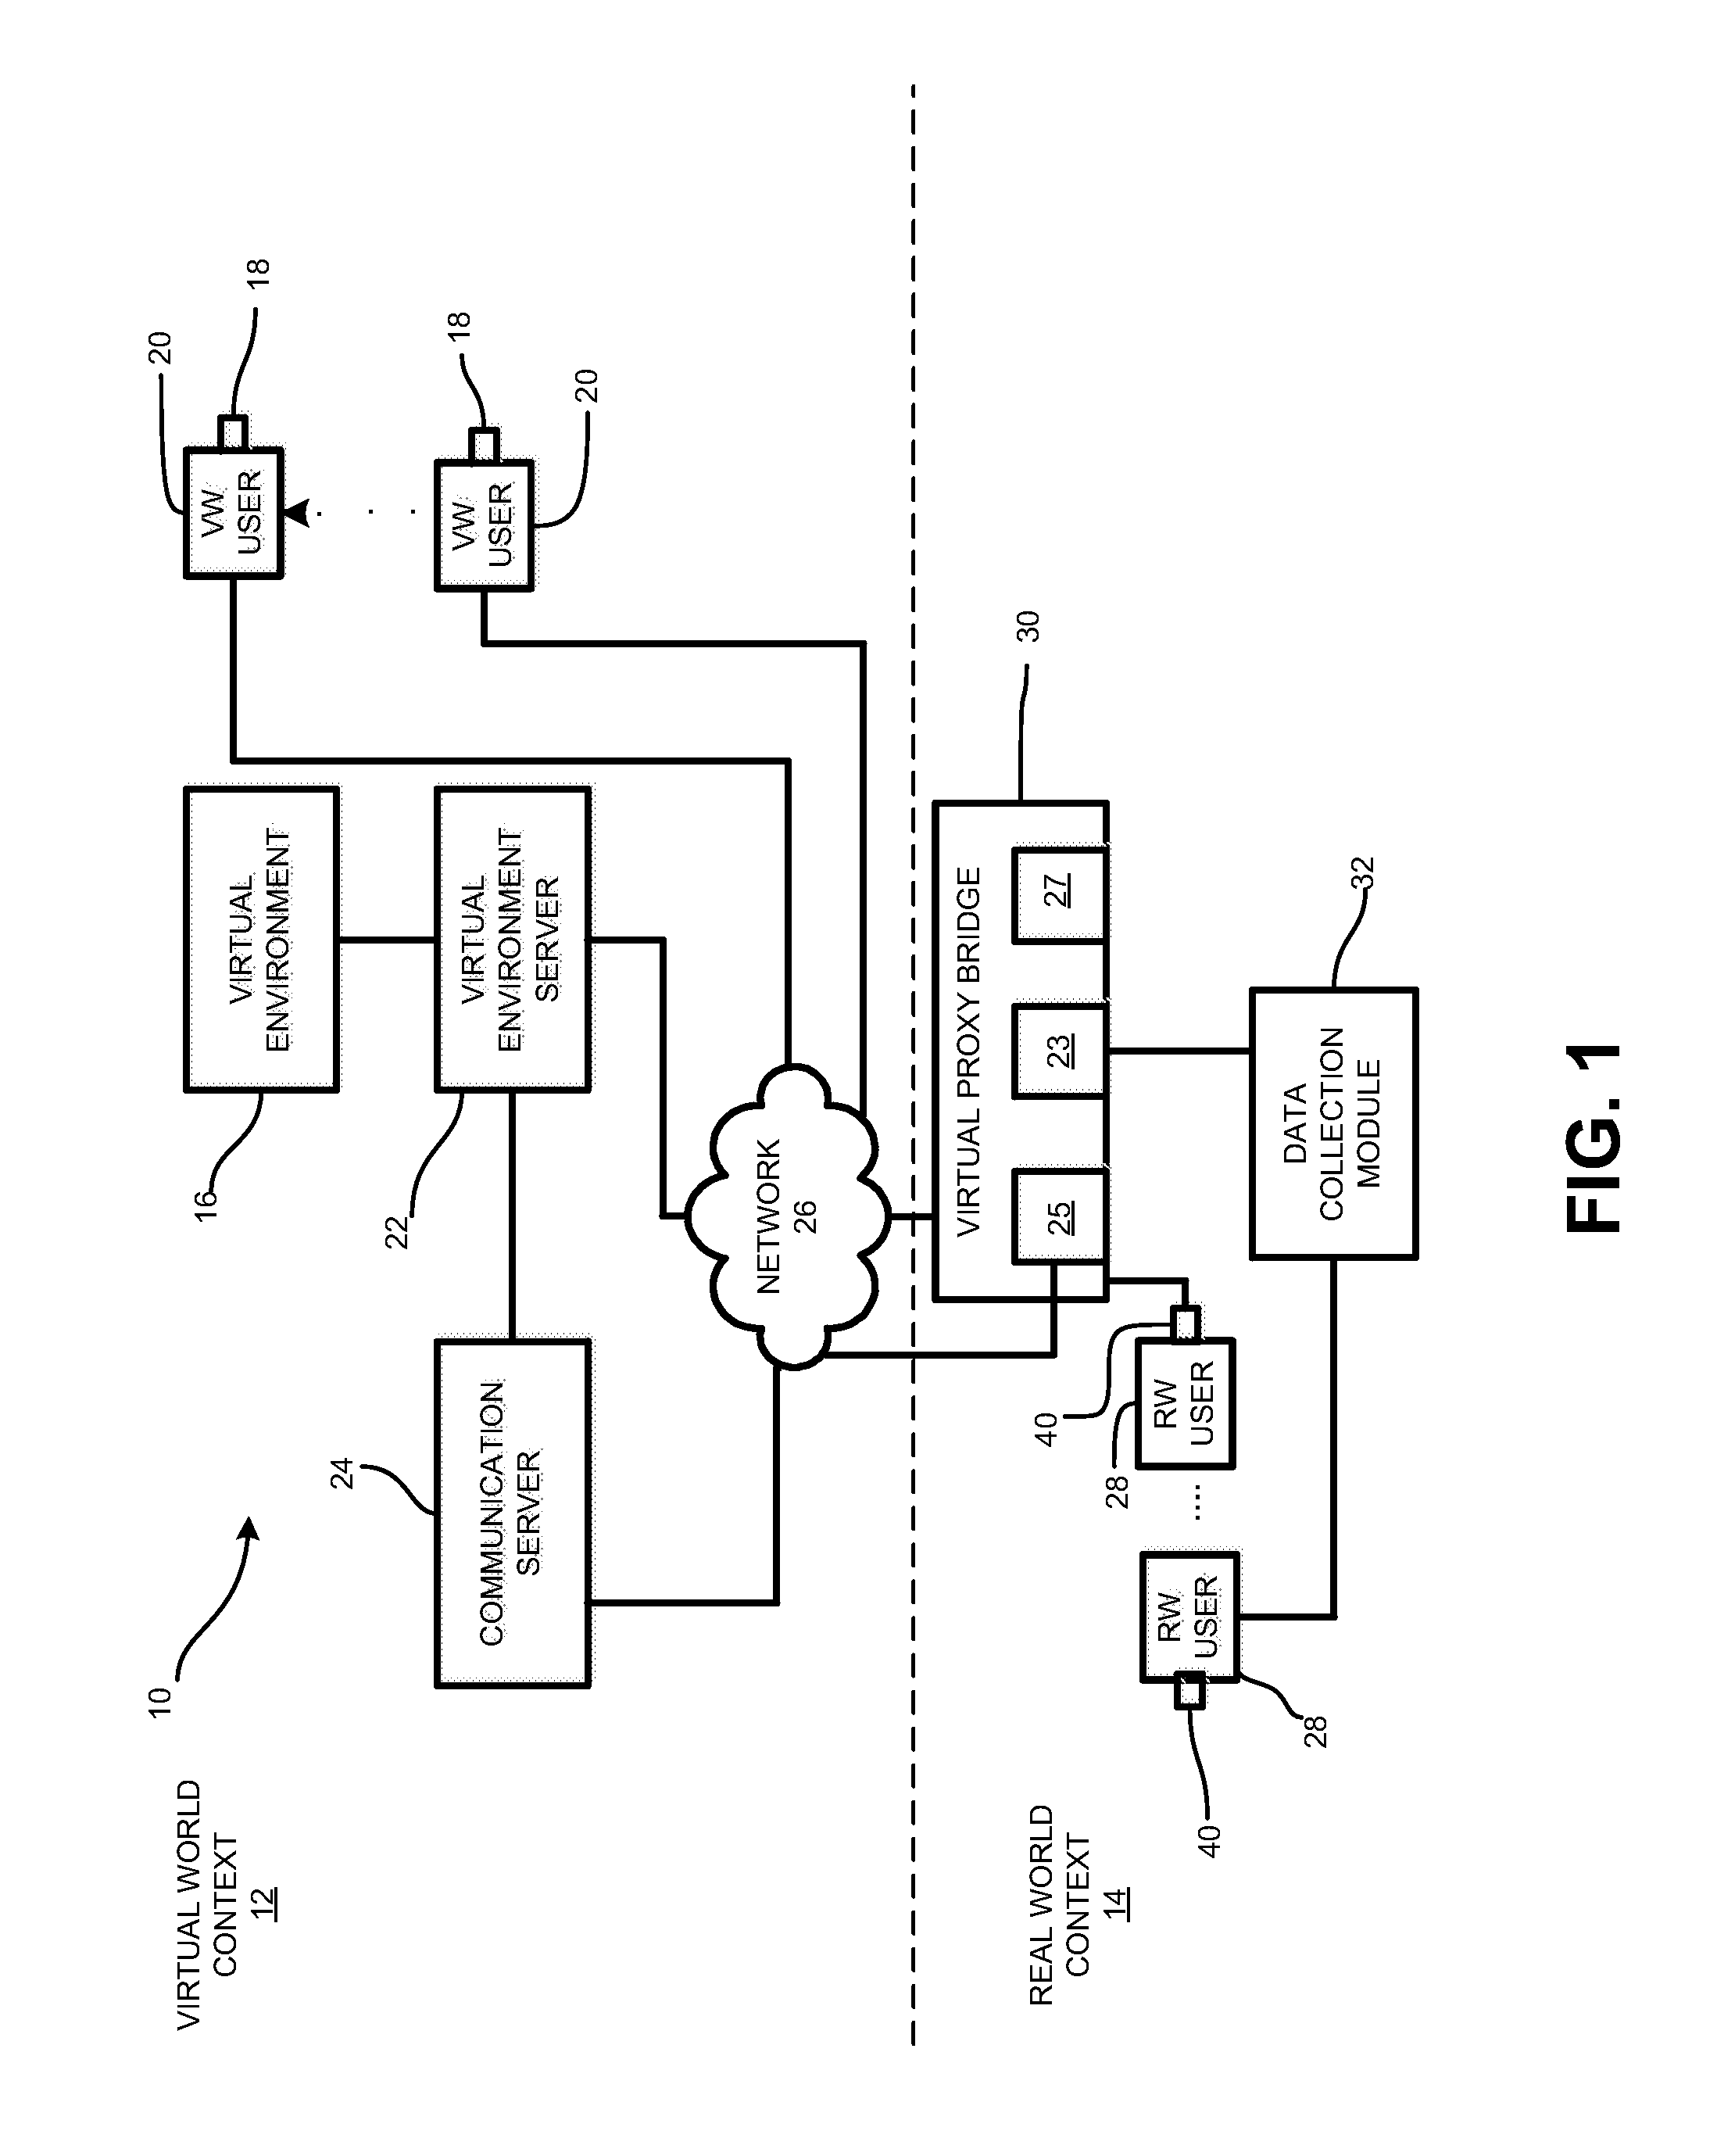 Method and system for physical mapping in a virtual world